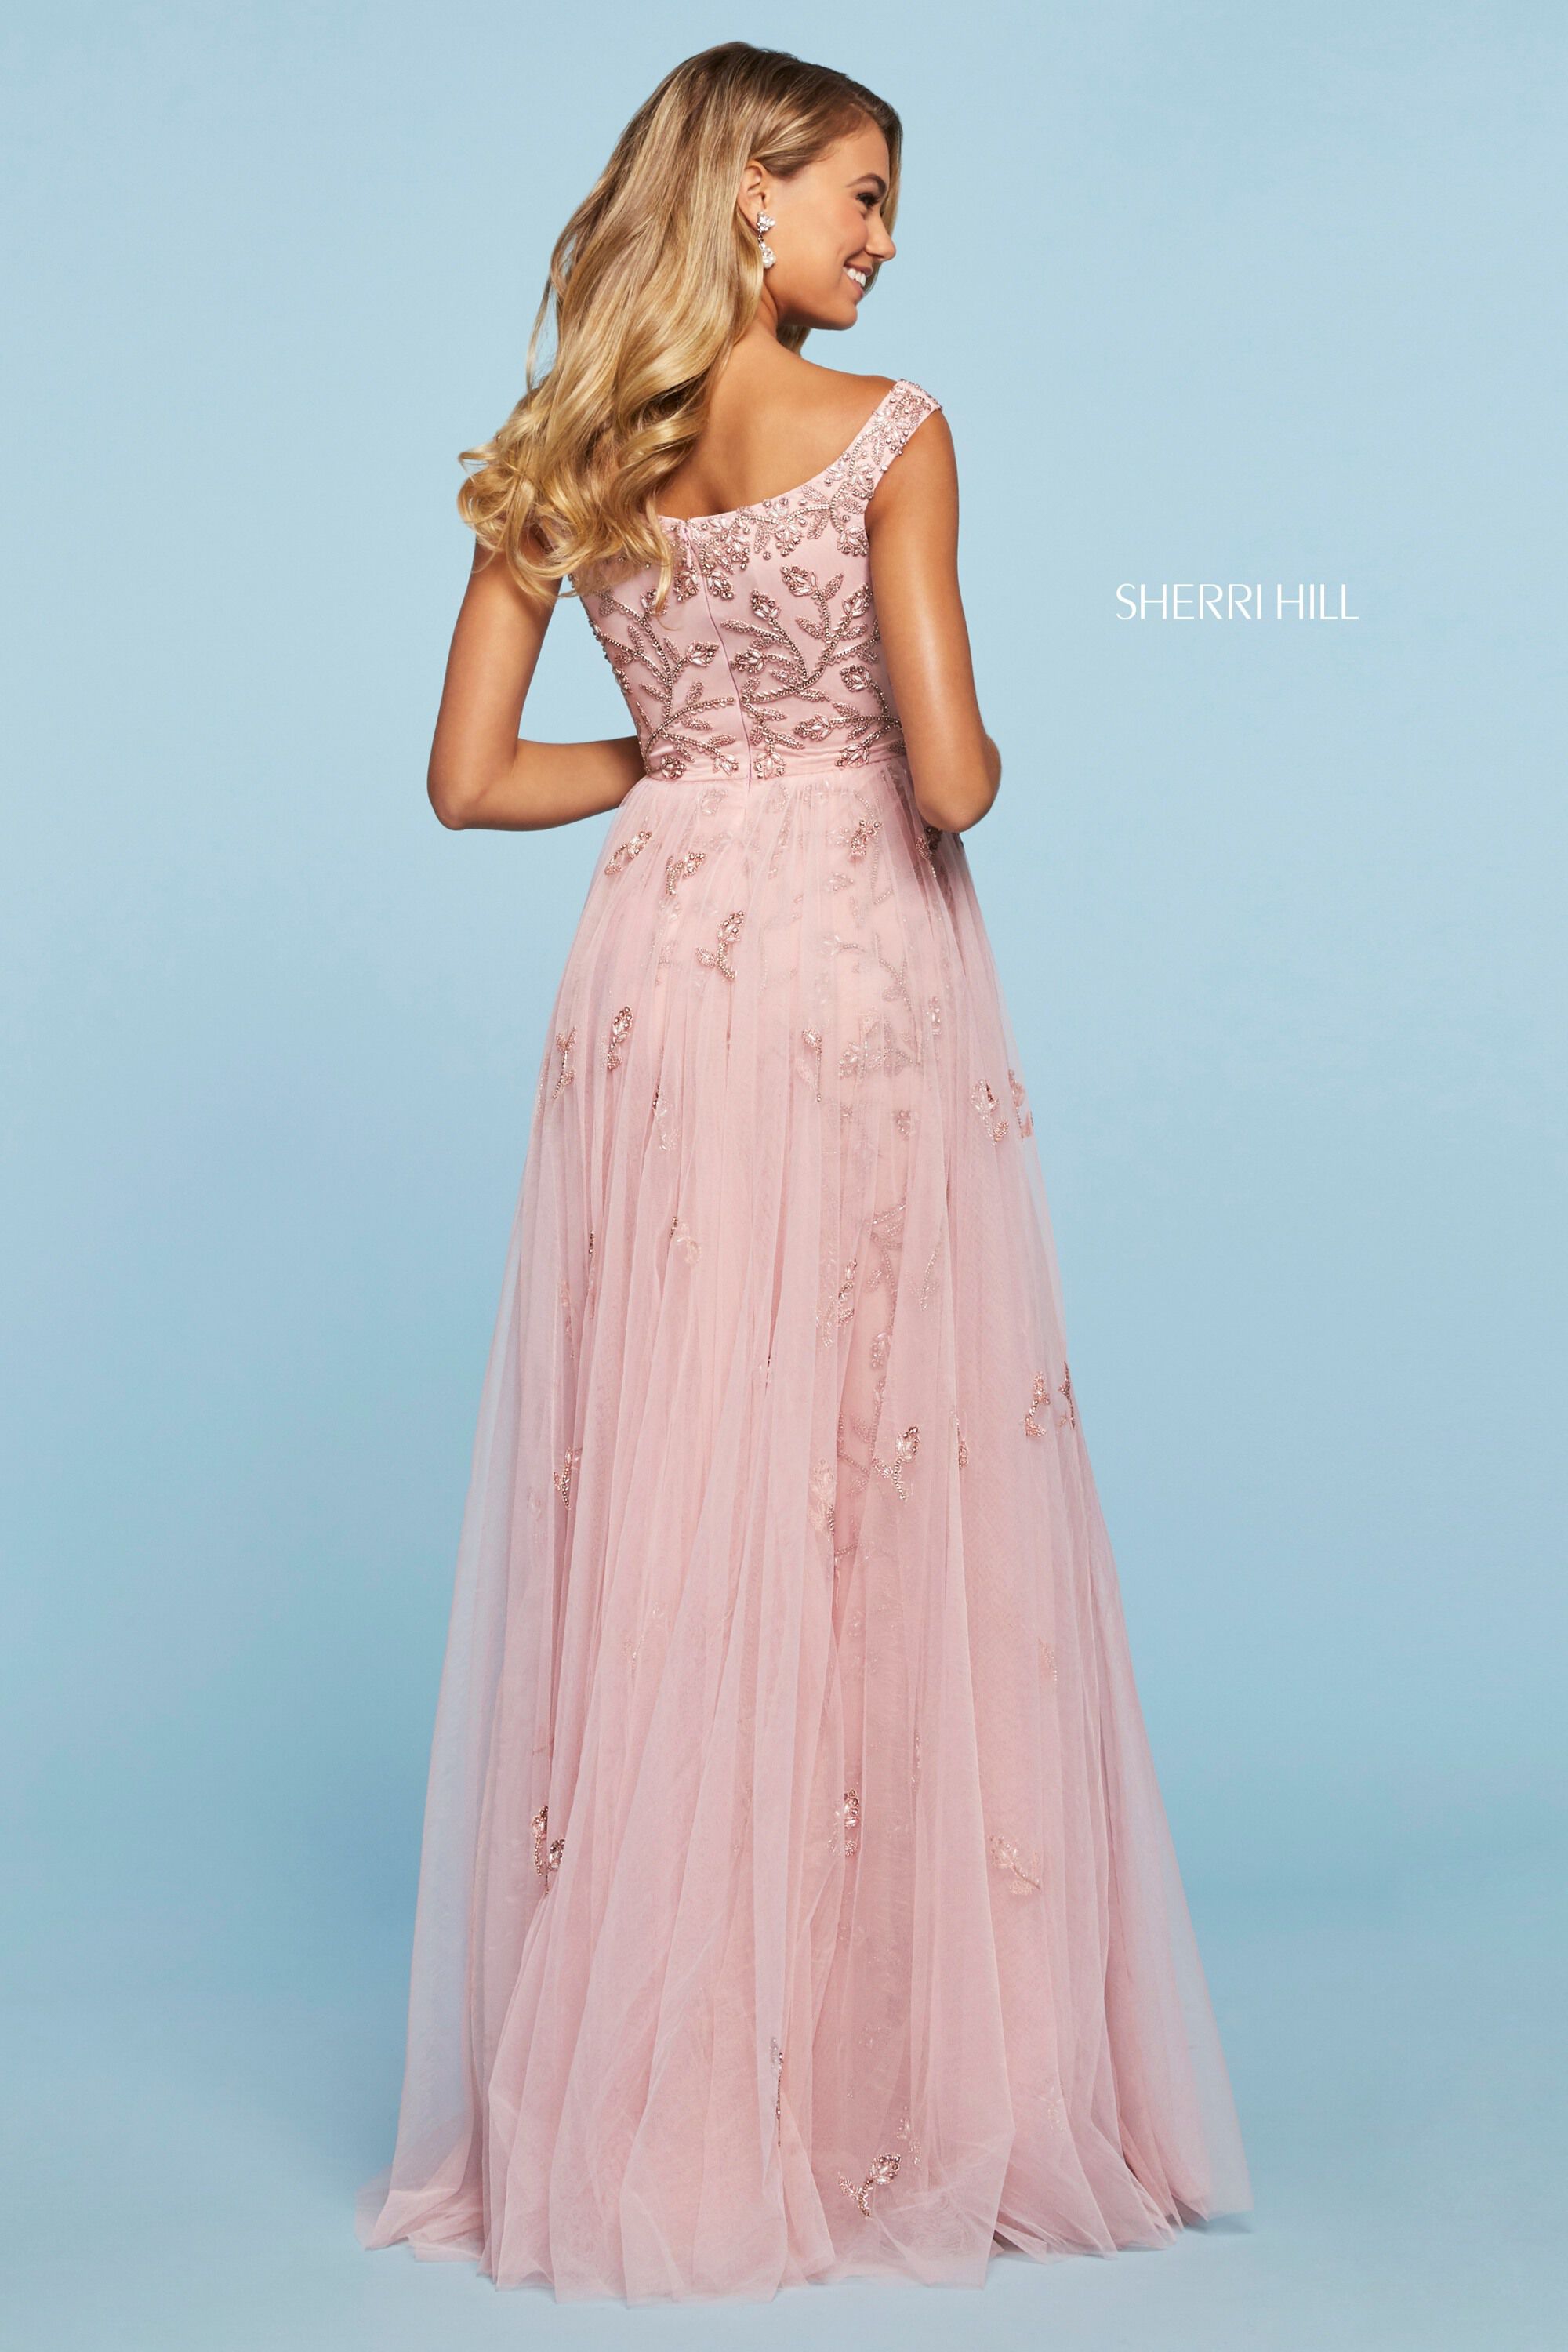 style № 53542 designed by SherriHill